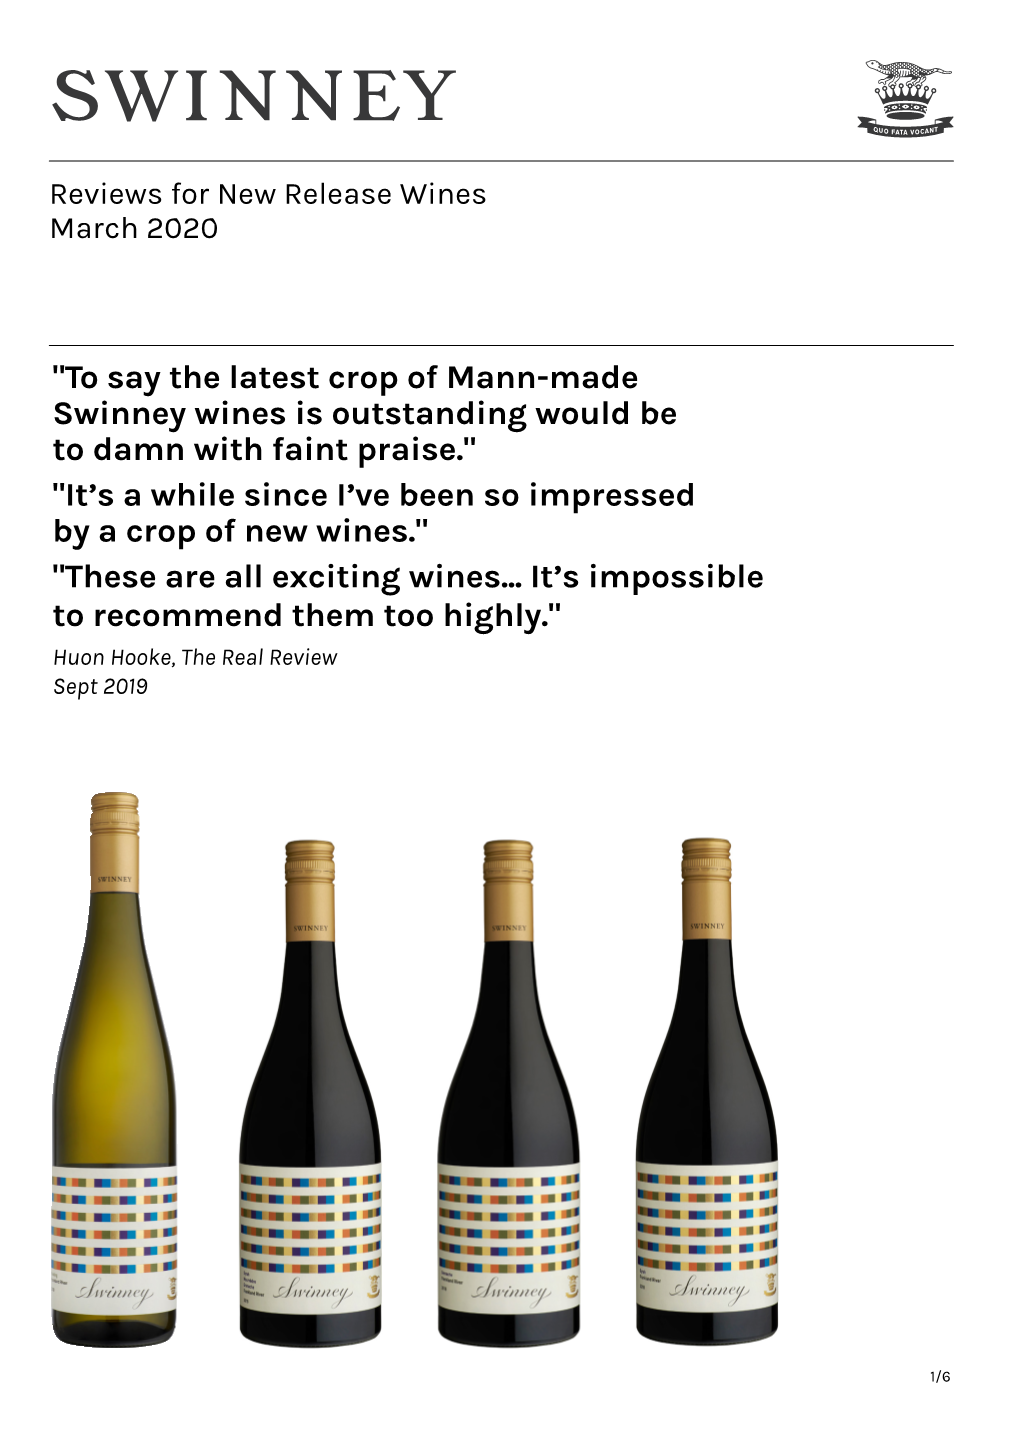 "To Say the Latest Crop of Mann-Made Swinney Wines Is Outstanding